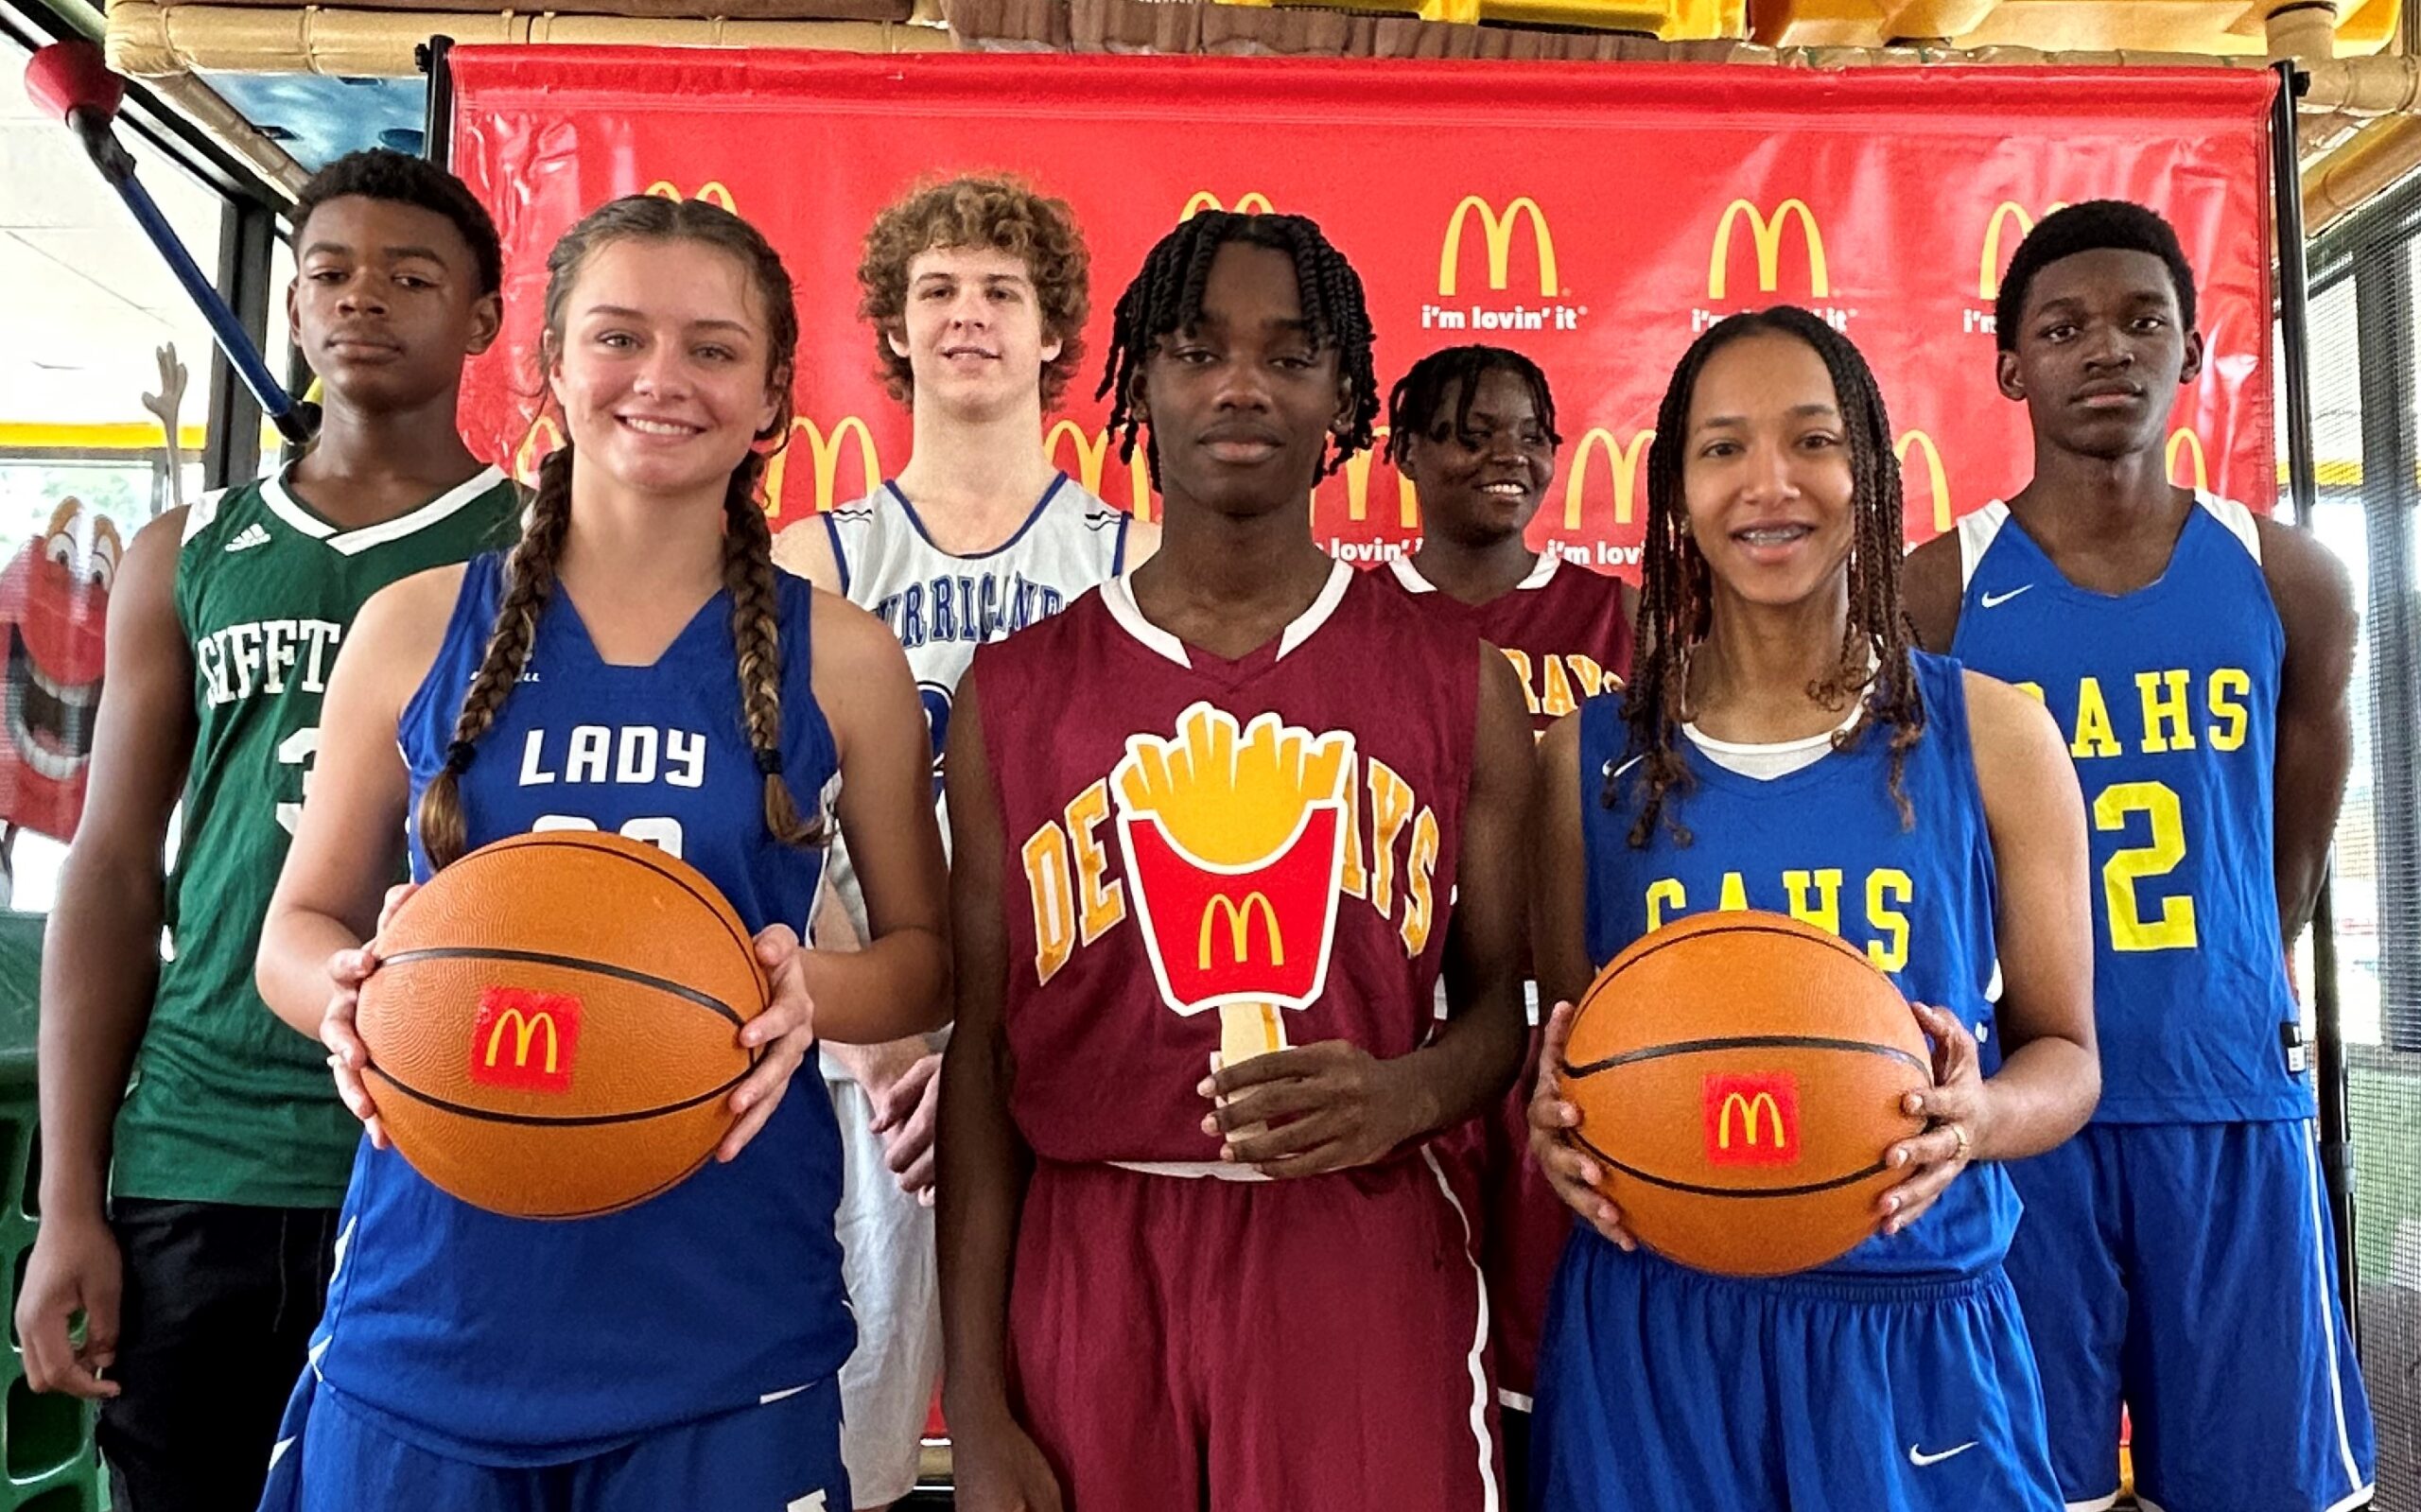 Student athletes from Gifft Hill School, Antilles School, Ivanna Eudora Kean High School, and Charlotte Amalie High School at the McDonald’s/St. Thomas-St. John IAA press conference promoting the 2023 MLK Basketball Tournament. (Source photo by Mark J. Daniel)